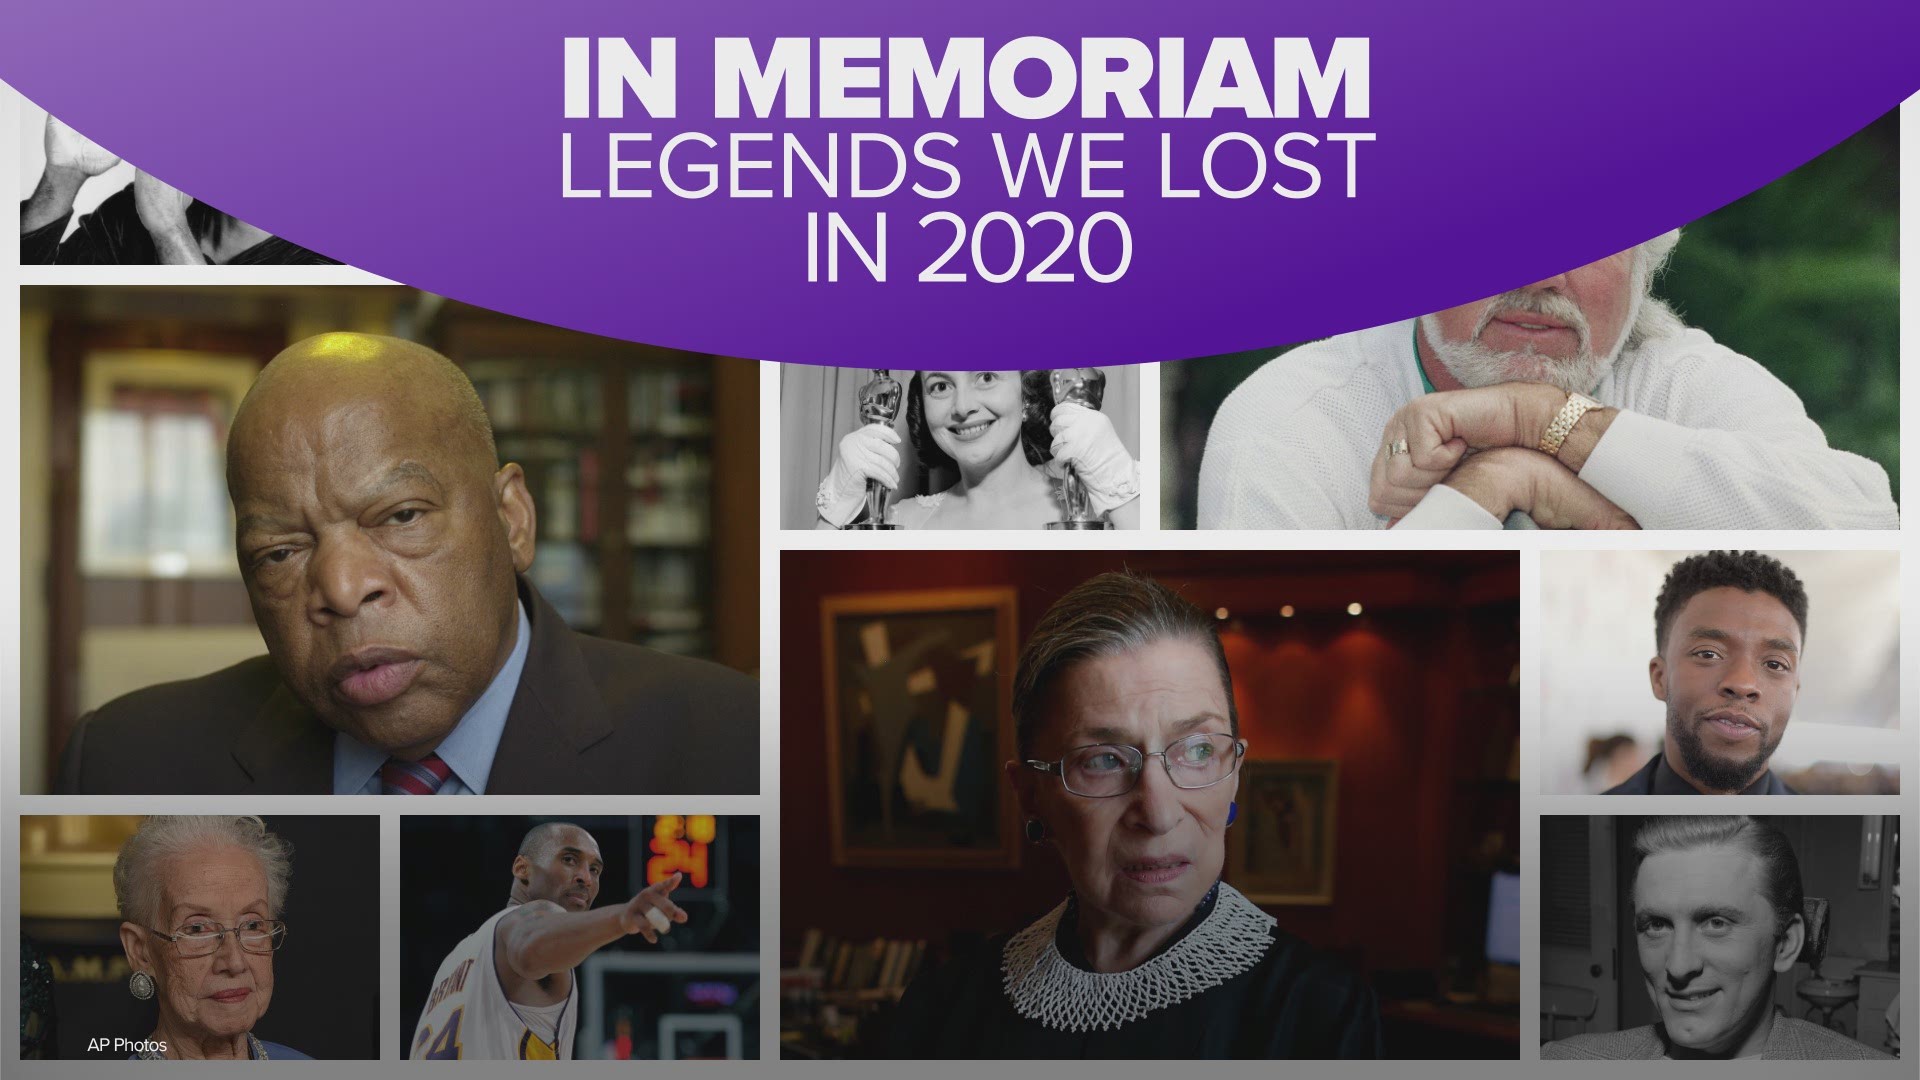 A look at legendary newsmakers, entertainers and sports legends the world lost in 2020.